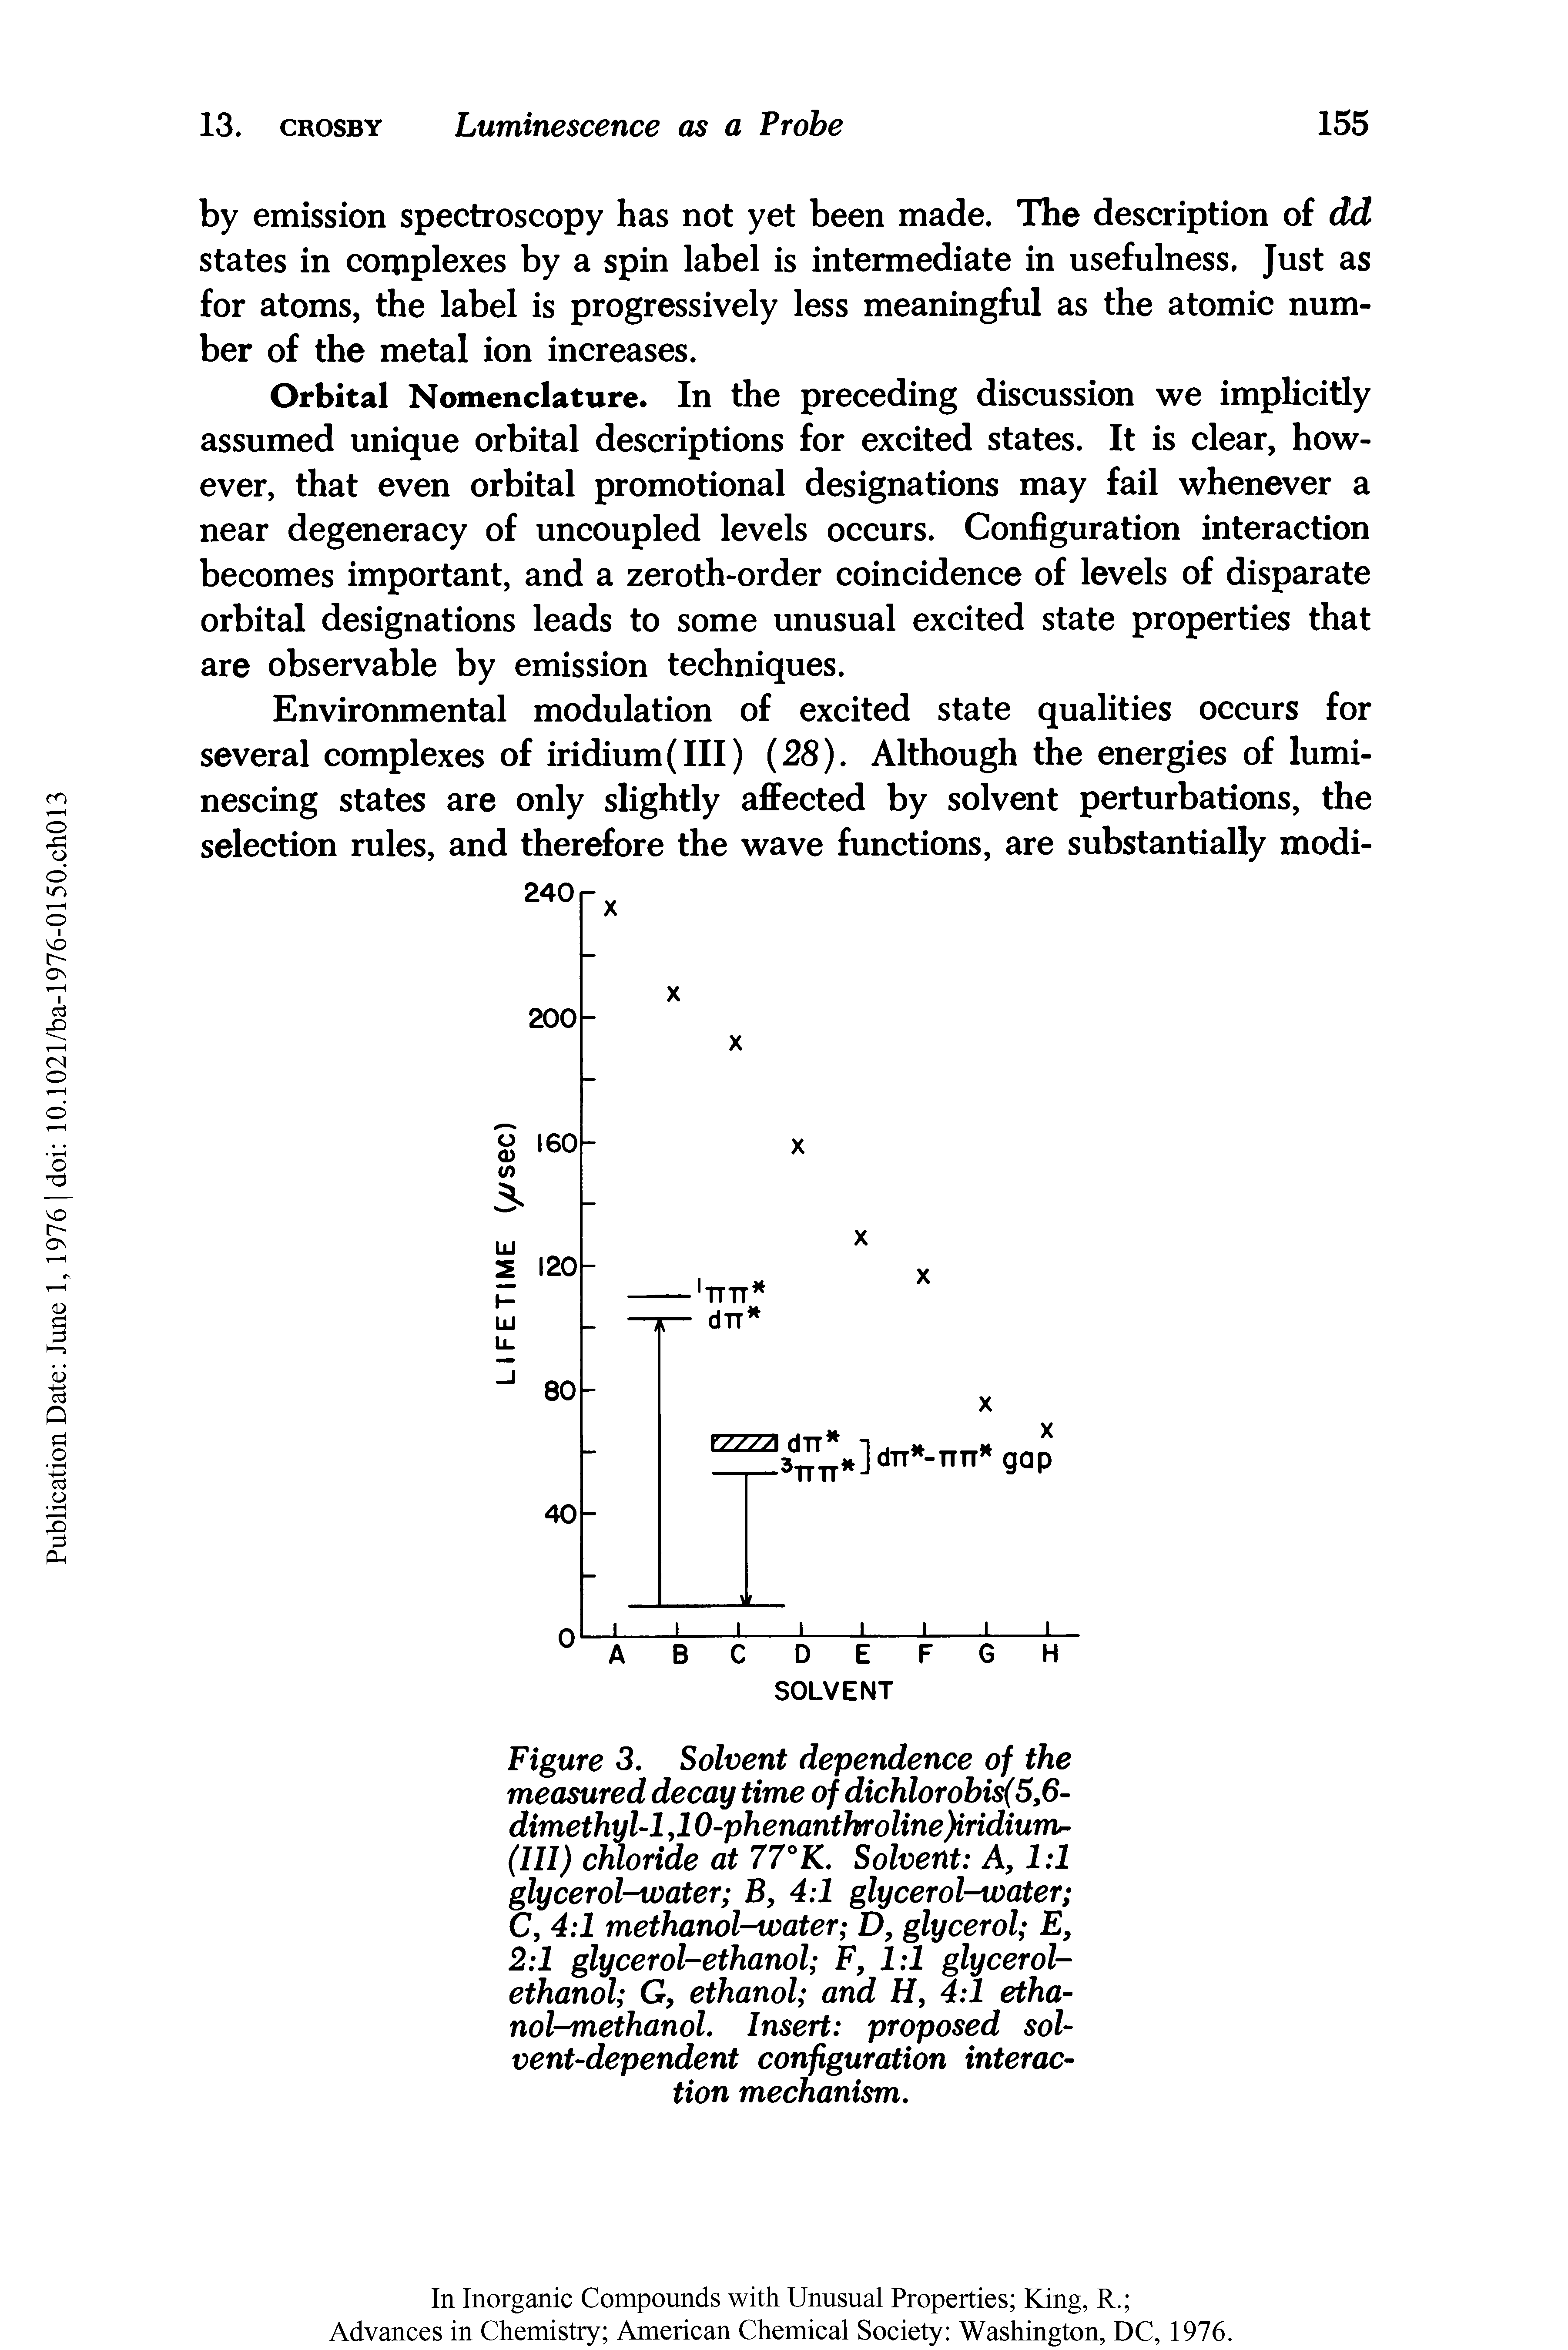 Figure 3. Solvent dependence of the measured decay time of dichlorobis(5fi-dimethyl-1,10-phenanthroline )iridiurYh-(III) chloride at 77°K. Solvent A, 1 1 glycerol-water B, 4 1 glycerol-water C, 4 1 methanol-water D, glycerol E, 2 1 glycerol-ethanol F, 1 1 glycerol-ethanol G, ethanol and H, 4 1 ethanol-methanol, Insert proposed solvent-dependent configuration interaction mechanism.